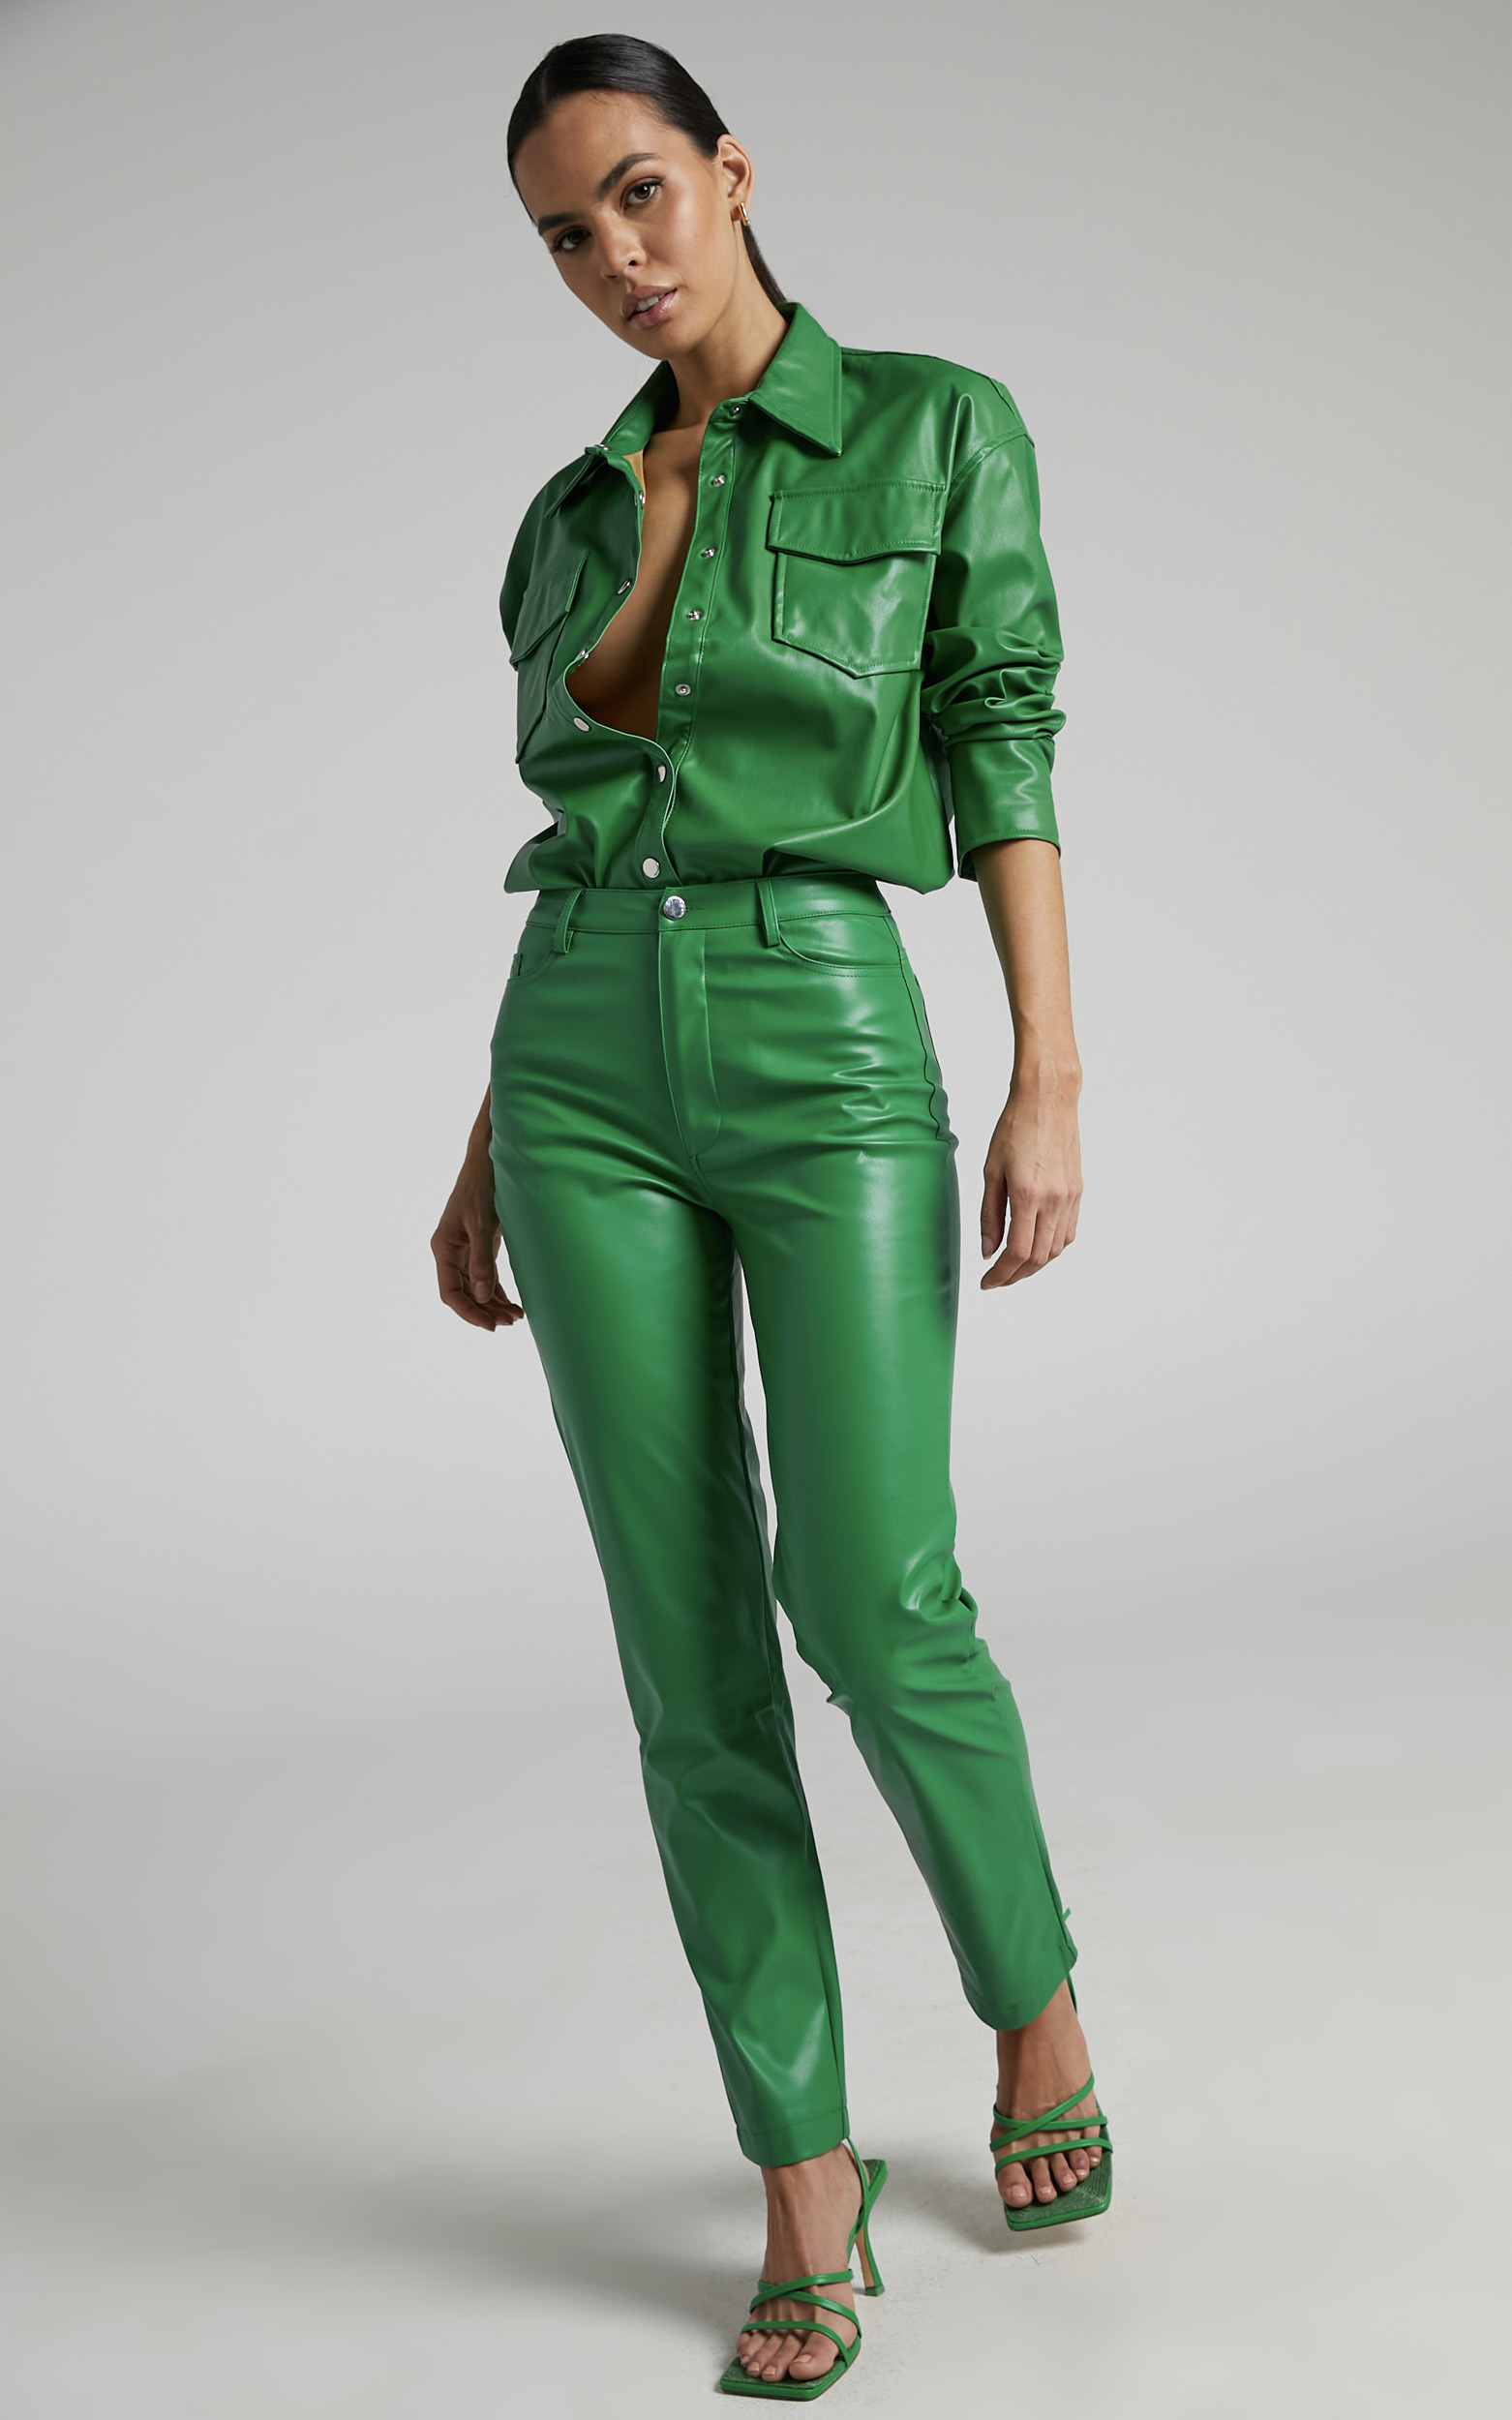 Dilyenne High Waist Straight Leg Pants in Green - 06, GRN3, hi-res image number null